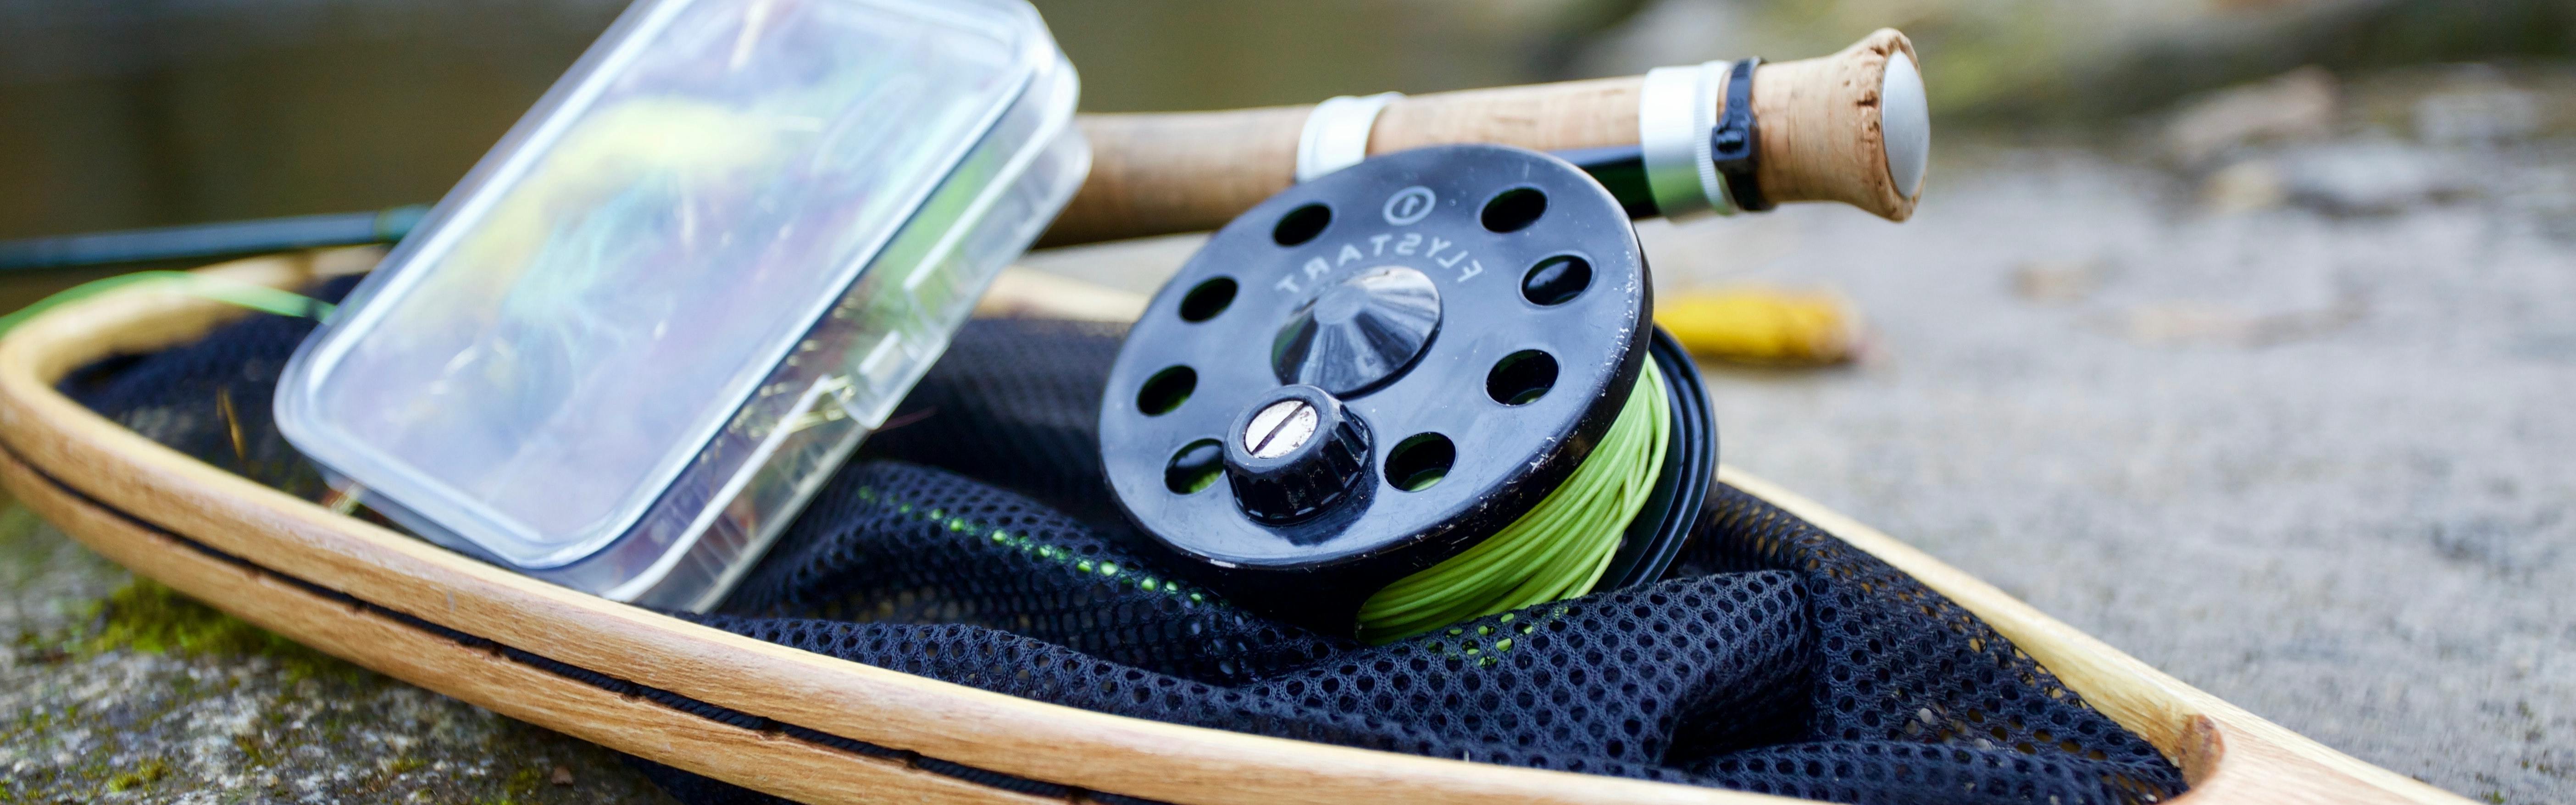 Everything You Need for Fly Fishing